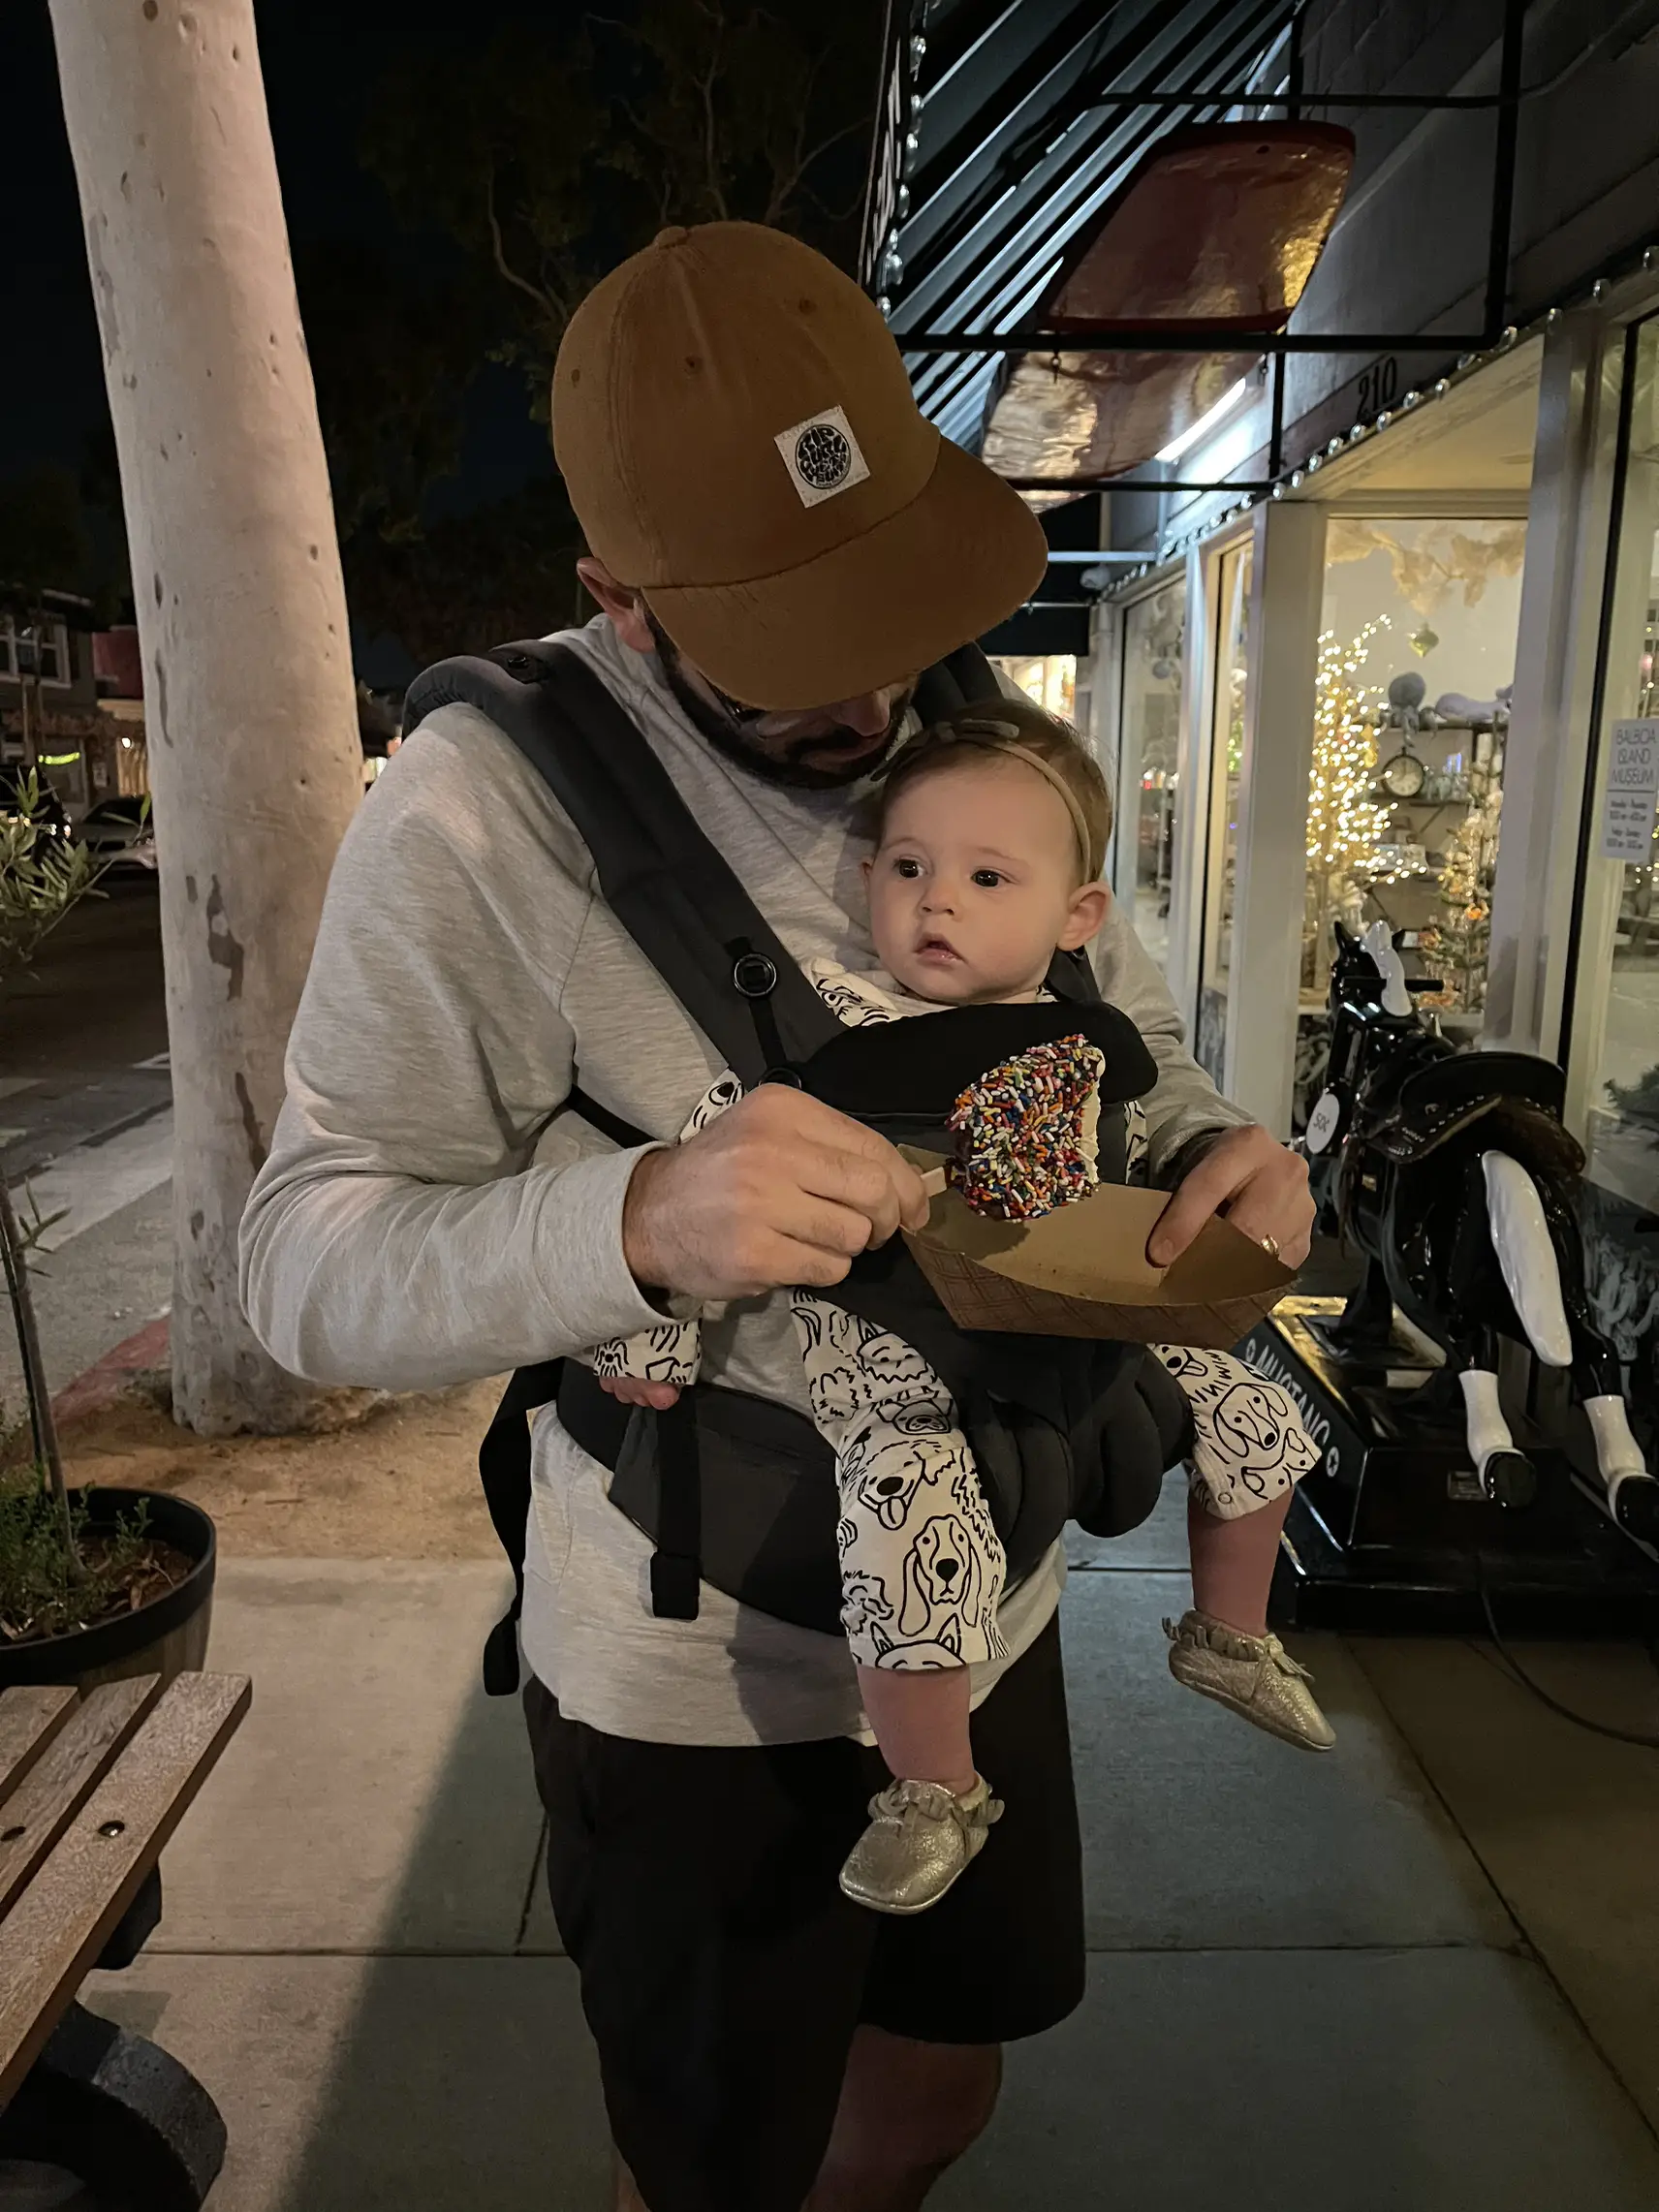 Fit check? Ergobaby Omni Breeze with infant insert. ~3 month old :  r/babywearing